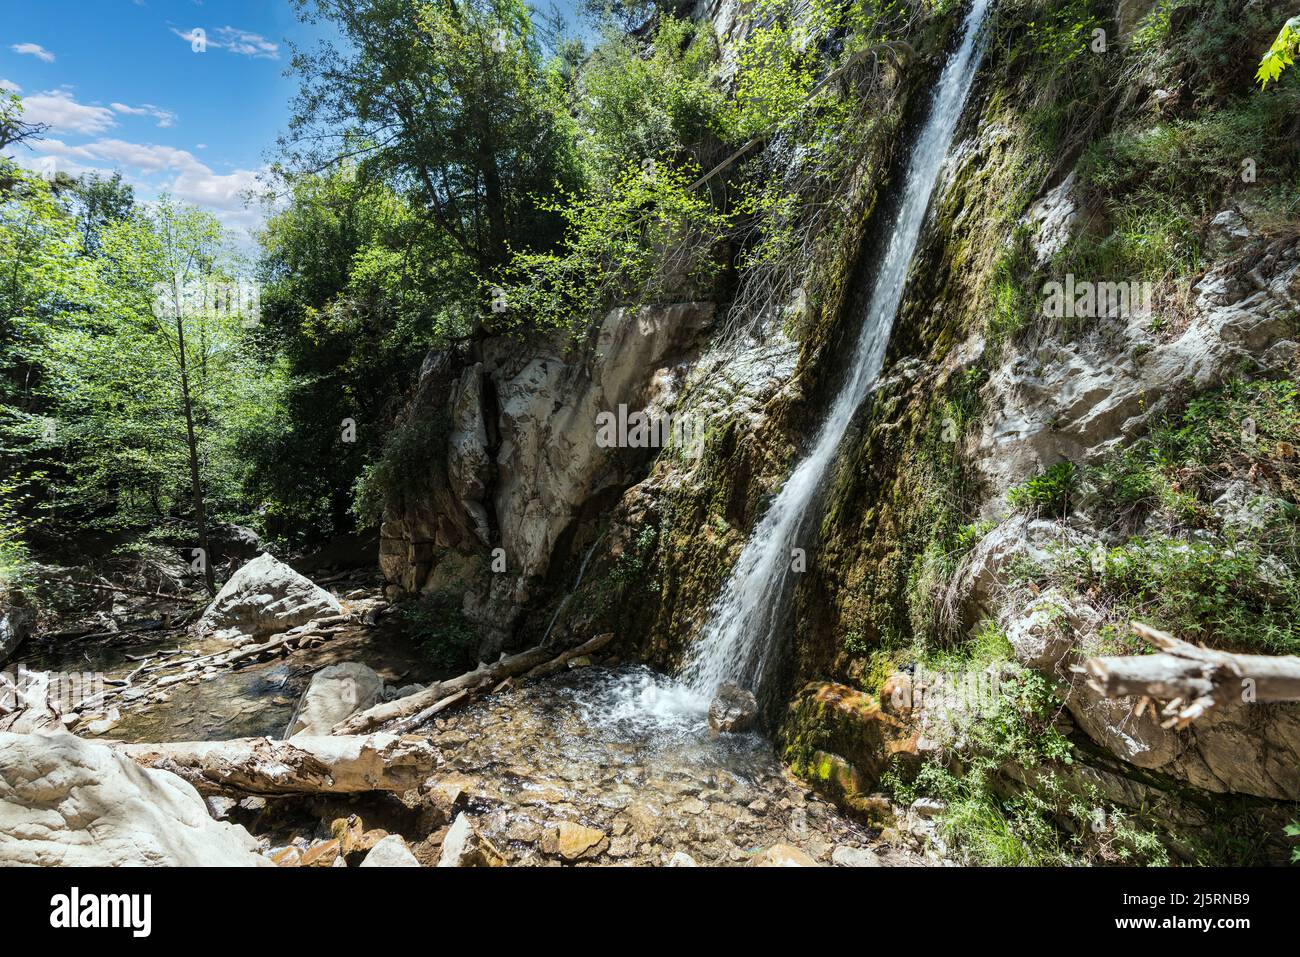 Lewis Falls in the Angeles National Forest near Azusa and Los Angeles, California. Stock Photo